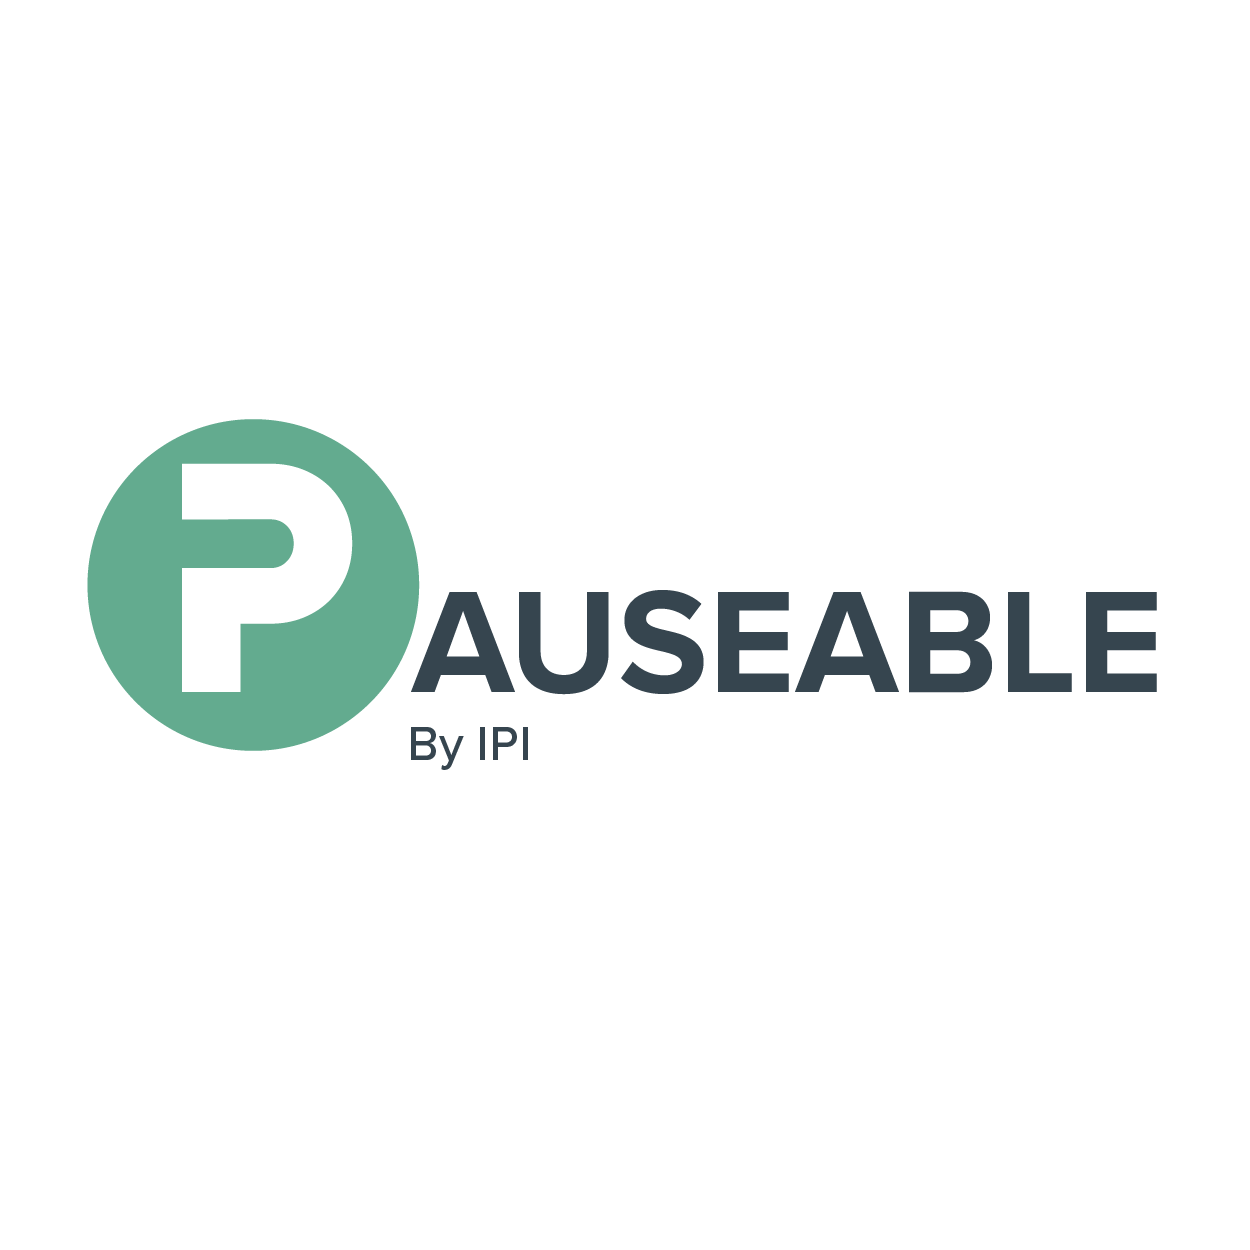 Pausable by IPI